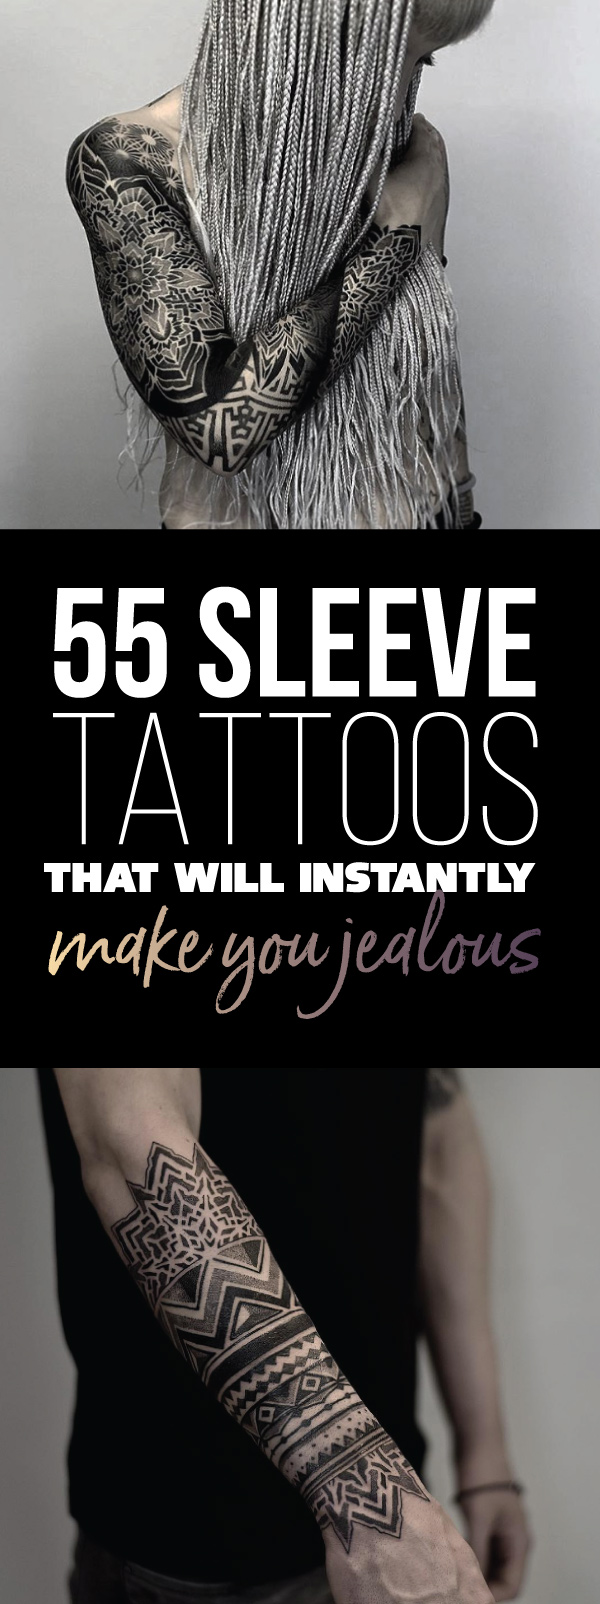 55 Sleeve Tattoos That Will Instantly Make You Jealous